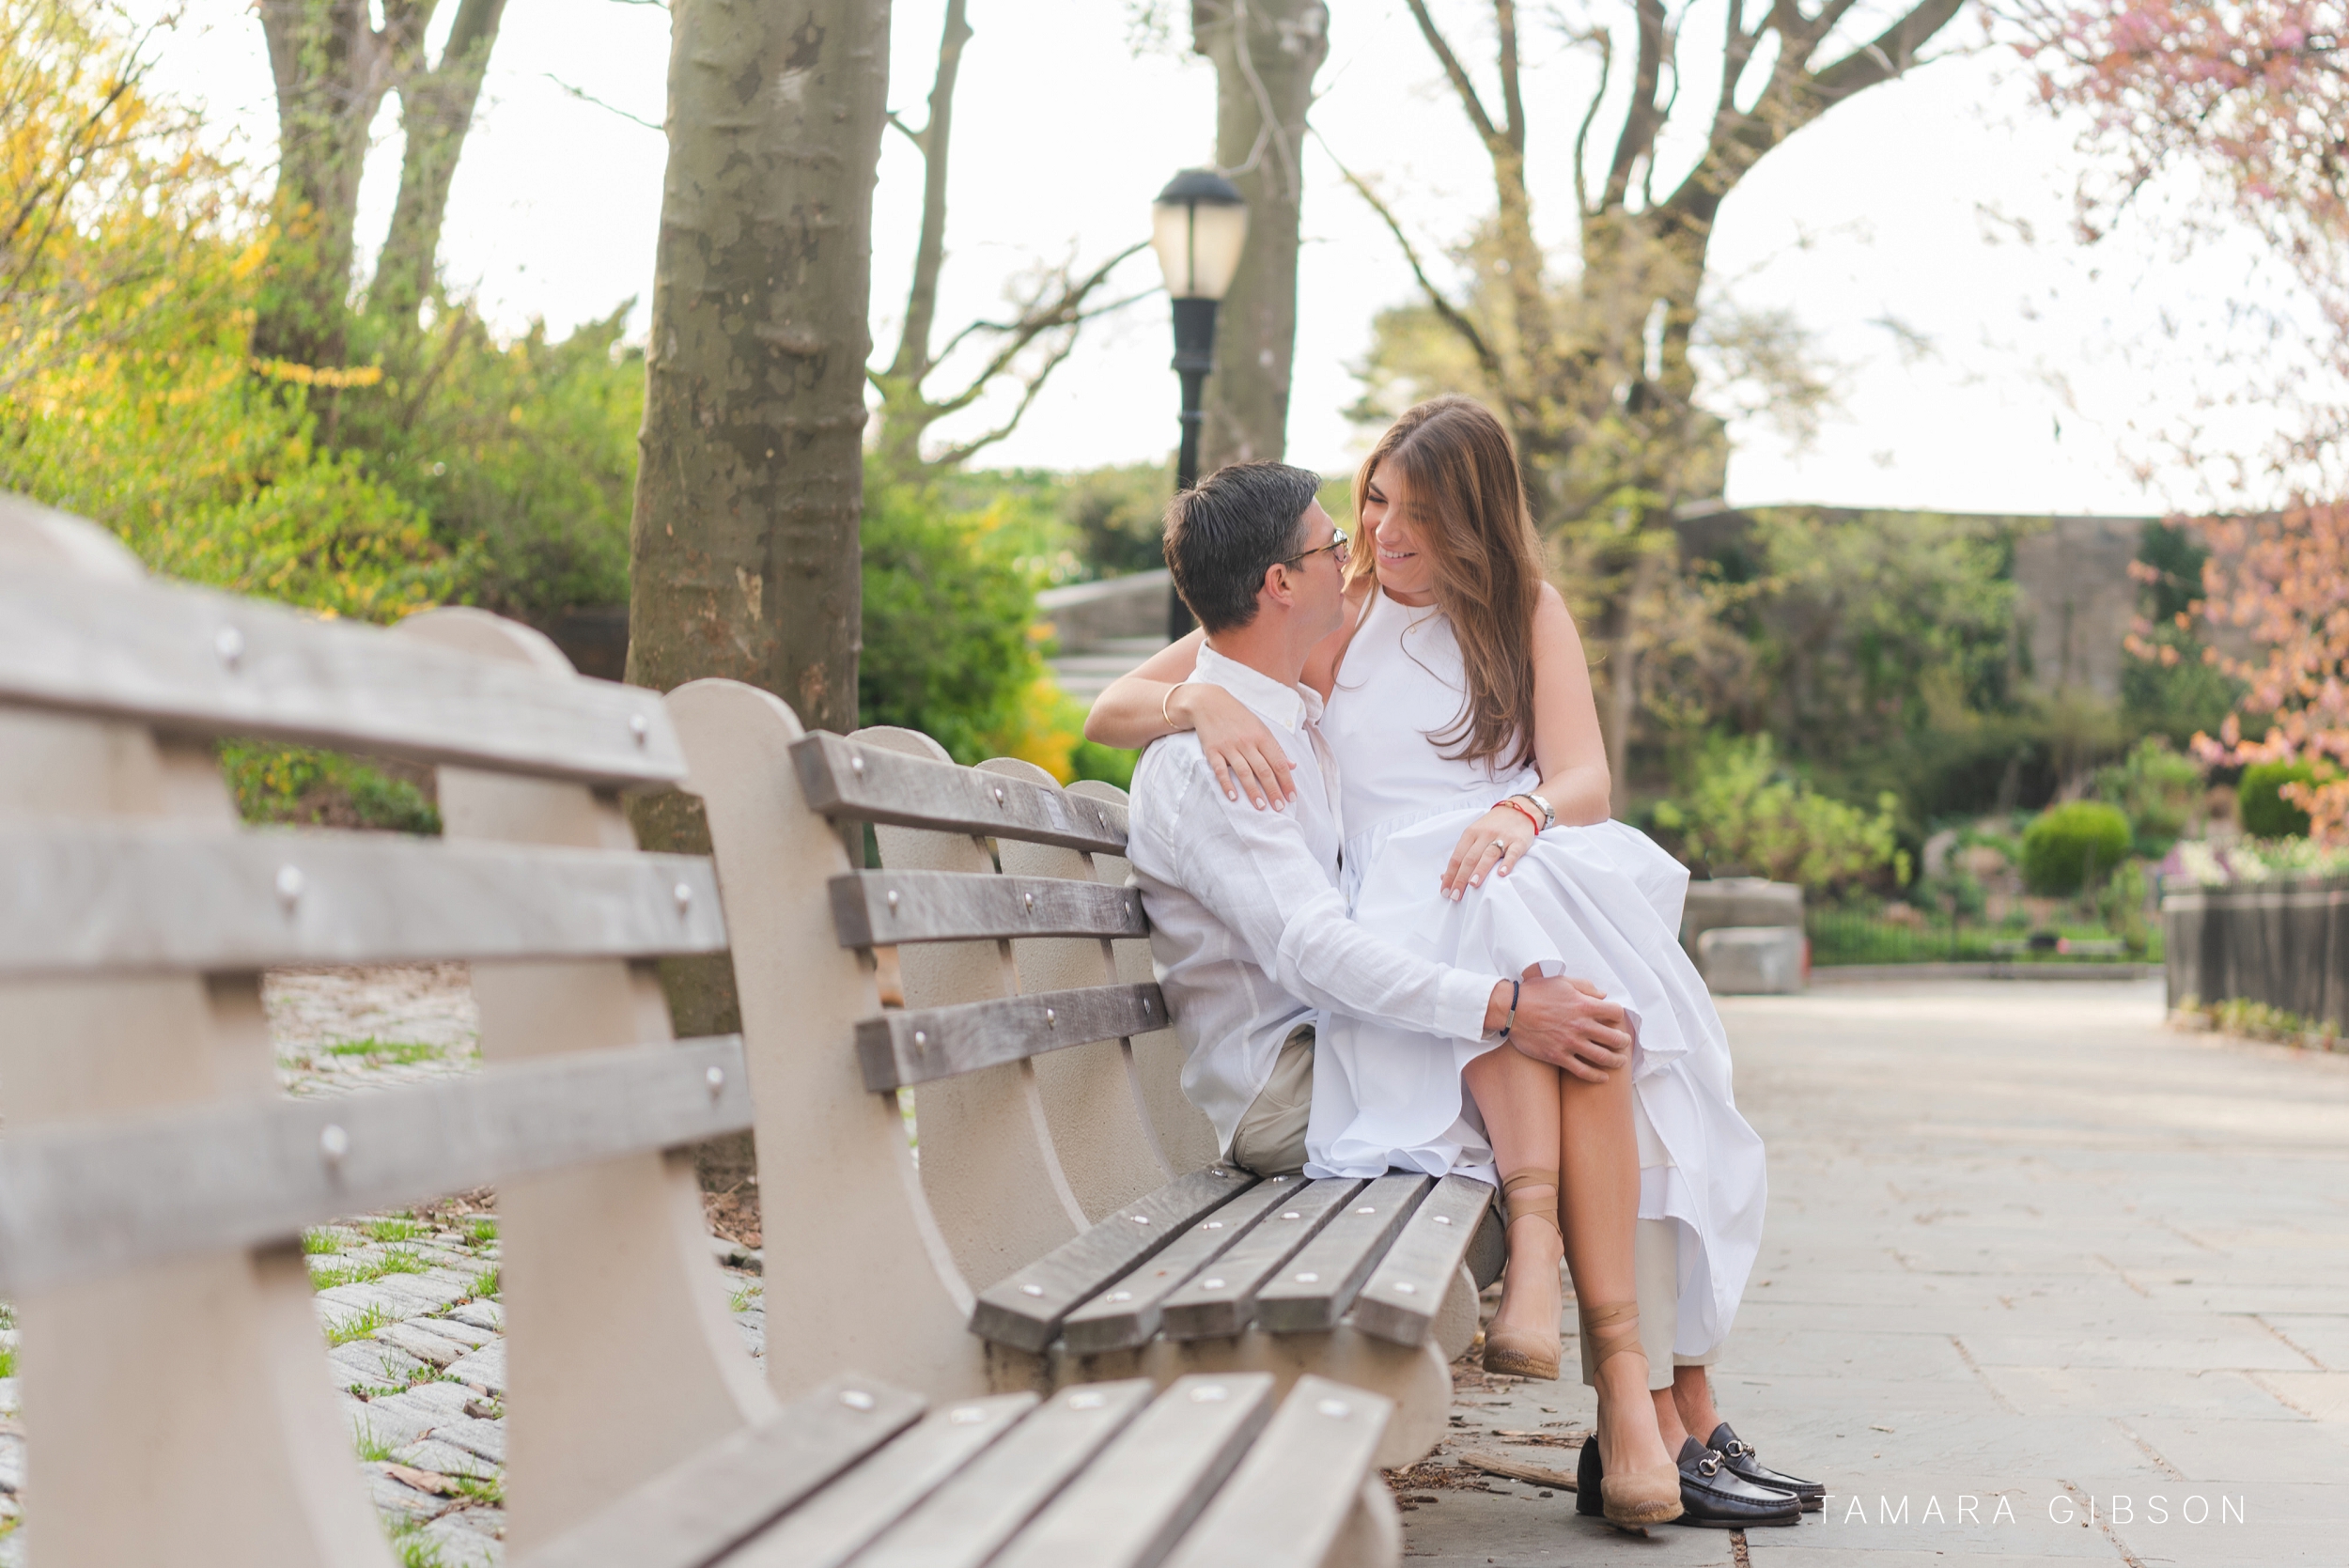 Couple on Park Bench during NYC Engagement Session